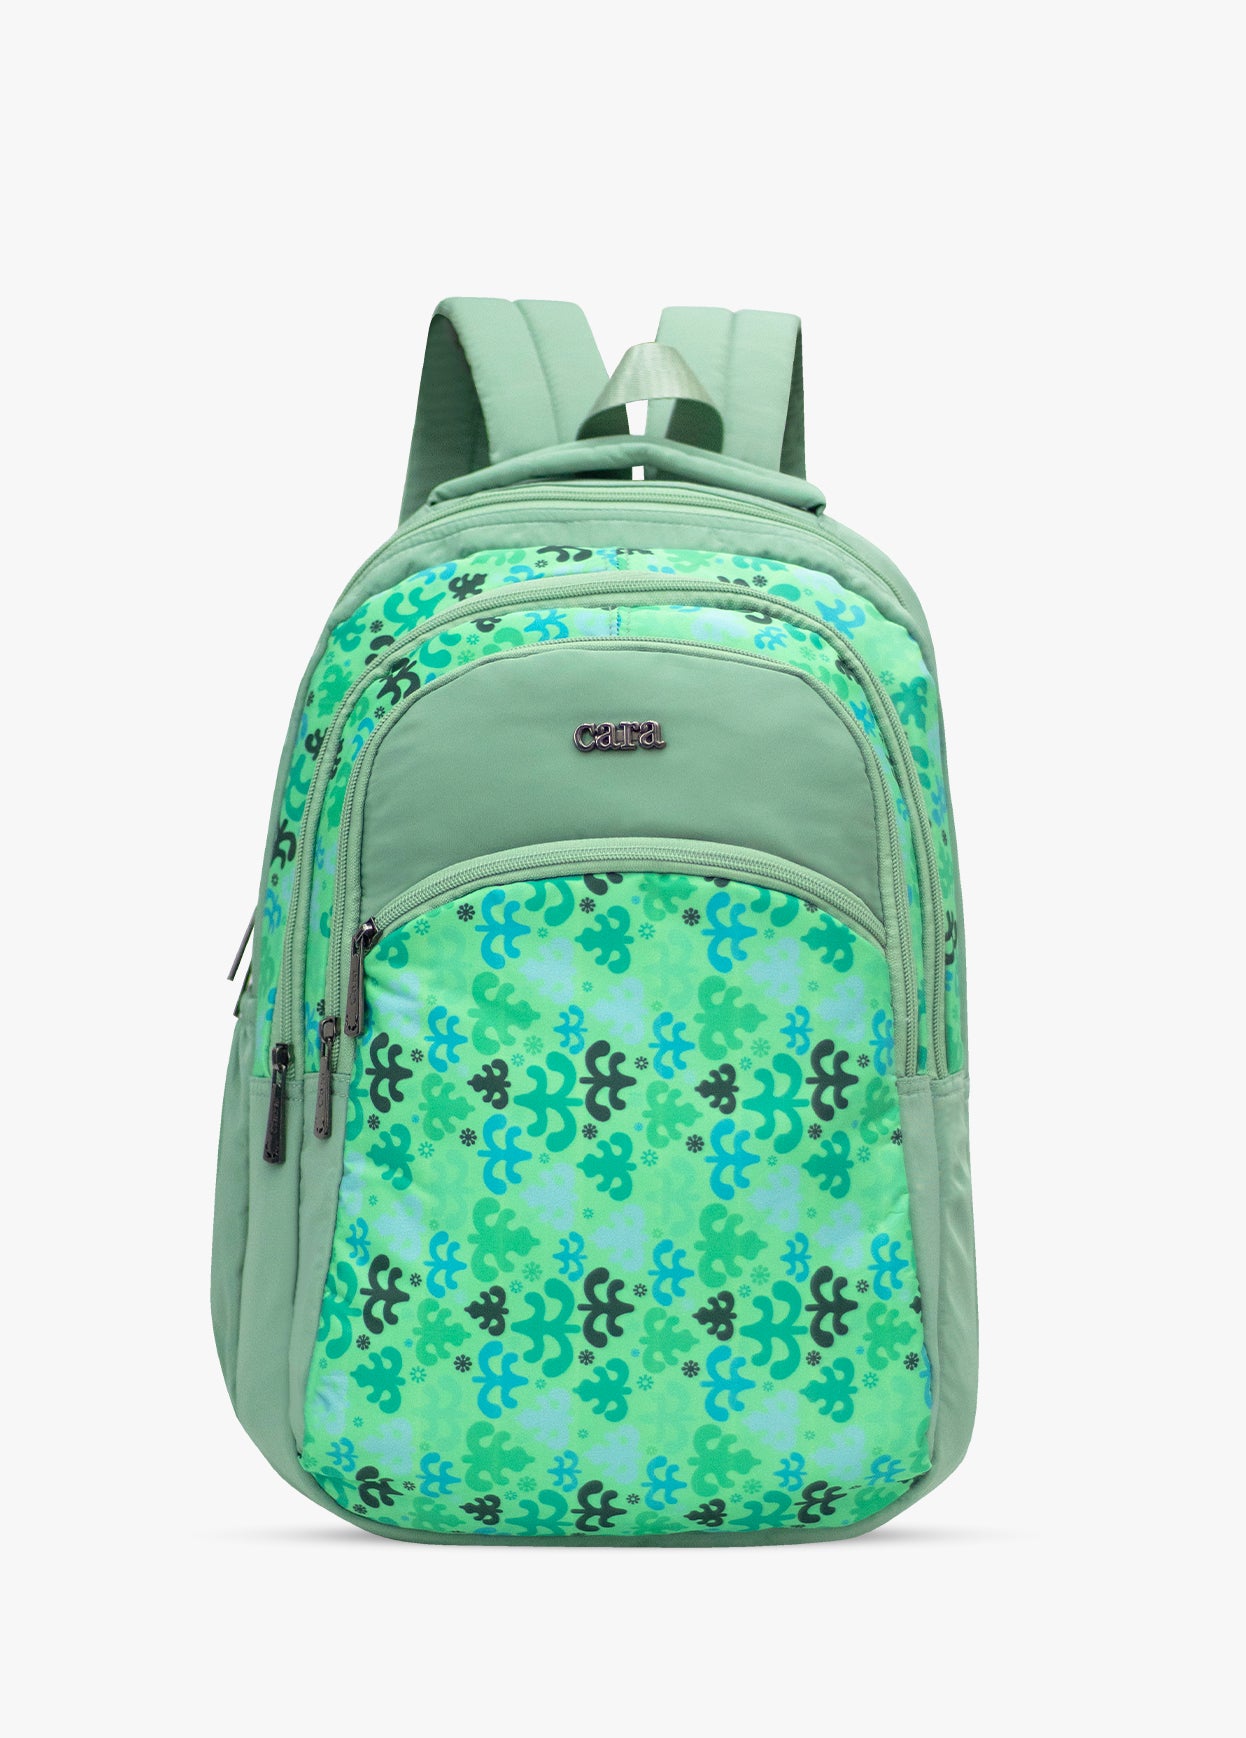 Printed backpack for girls and boys